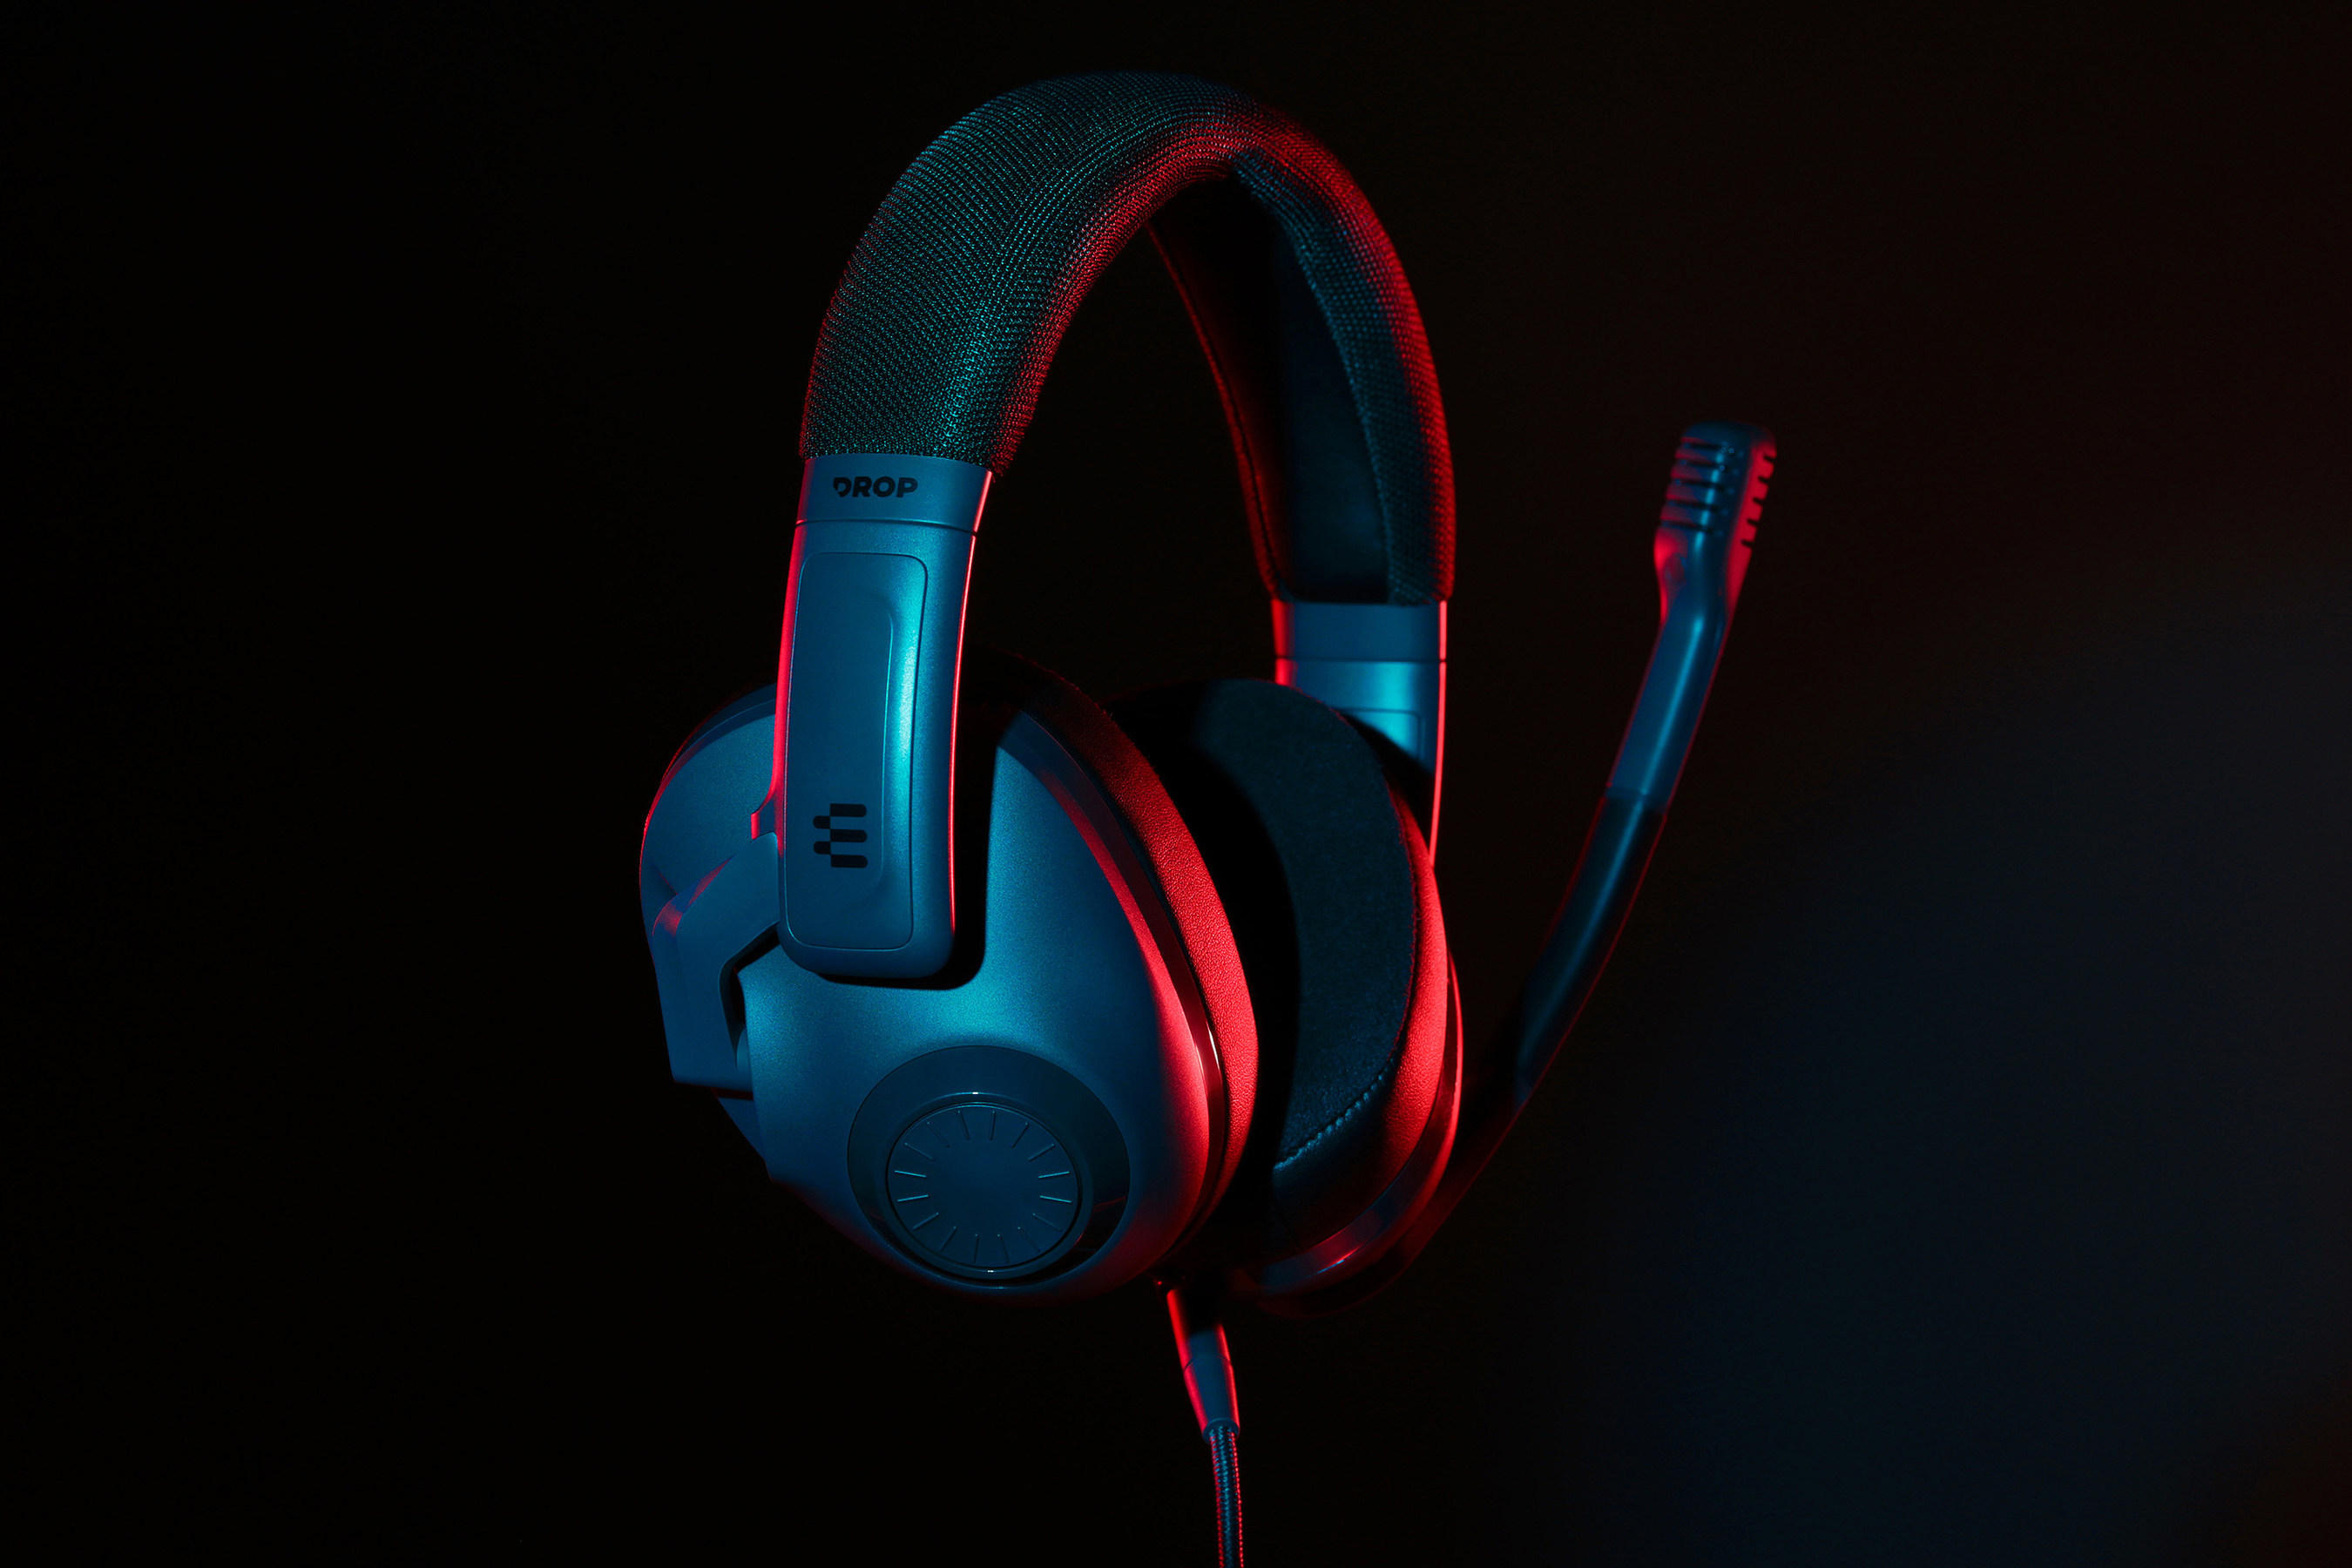 Drop Unveils New High-Performance Gaming Headset Under $80